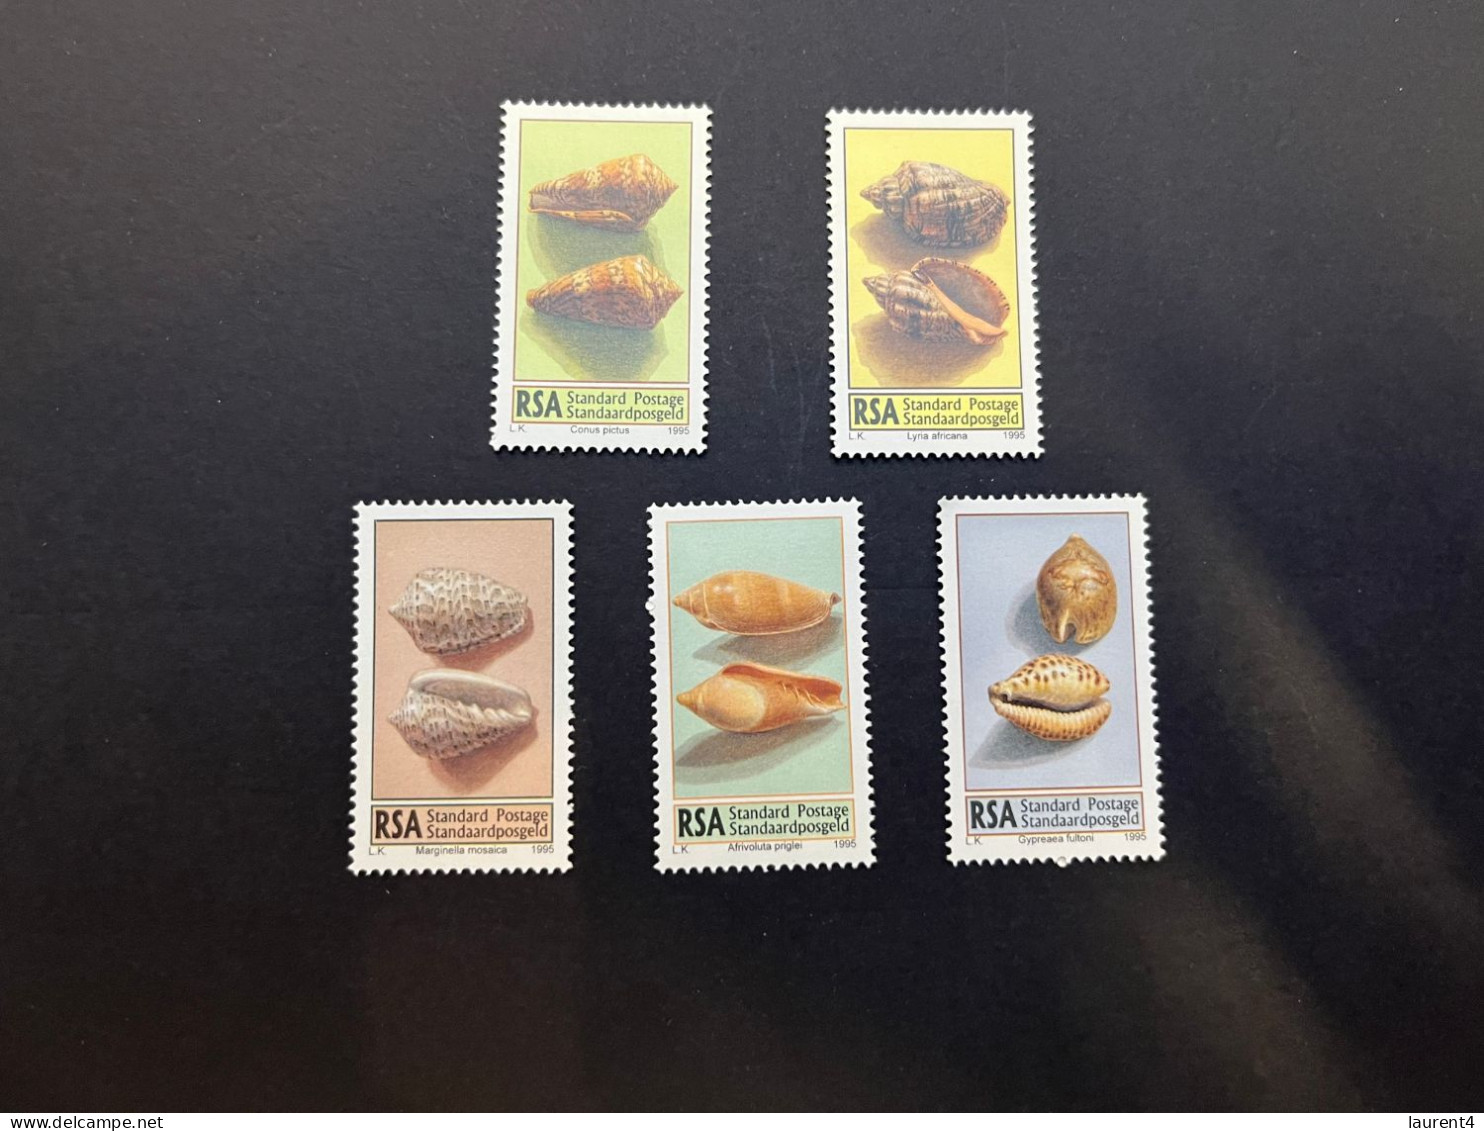 11-5-2024 (stamp)  Shell / Seashell - Coquillage - RSA (5 Values) - Crustacés